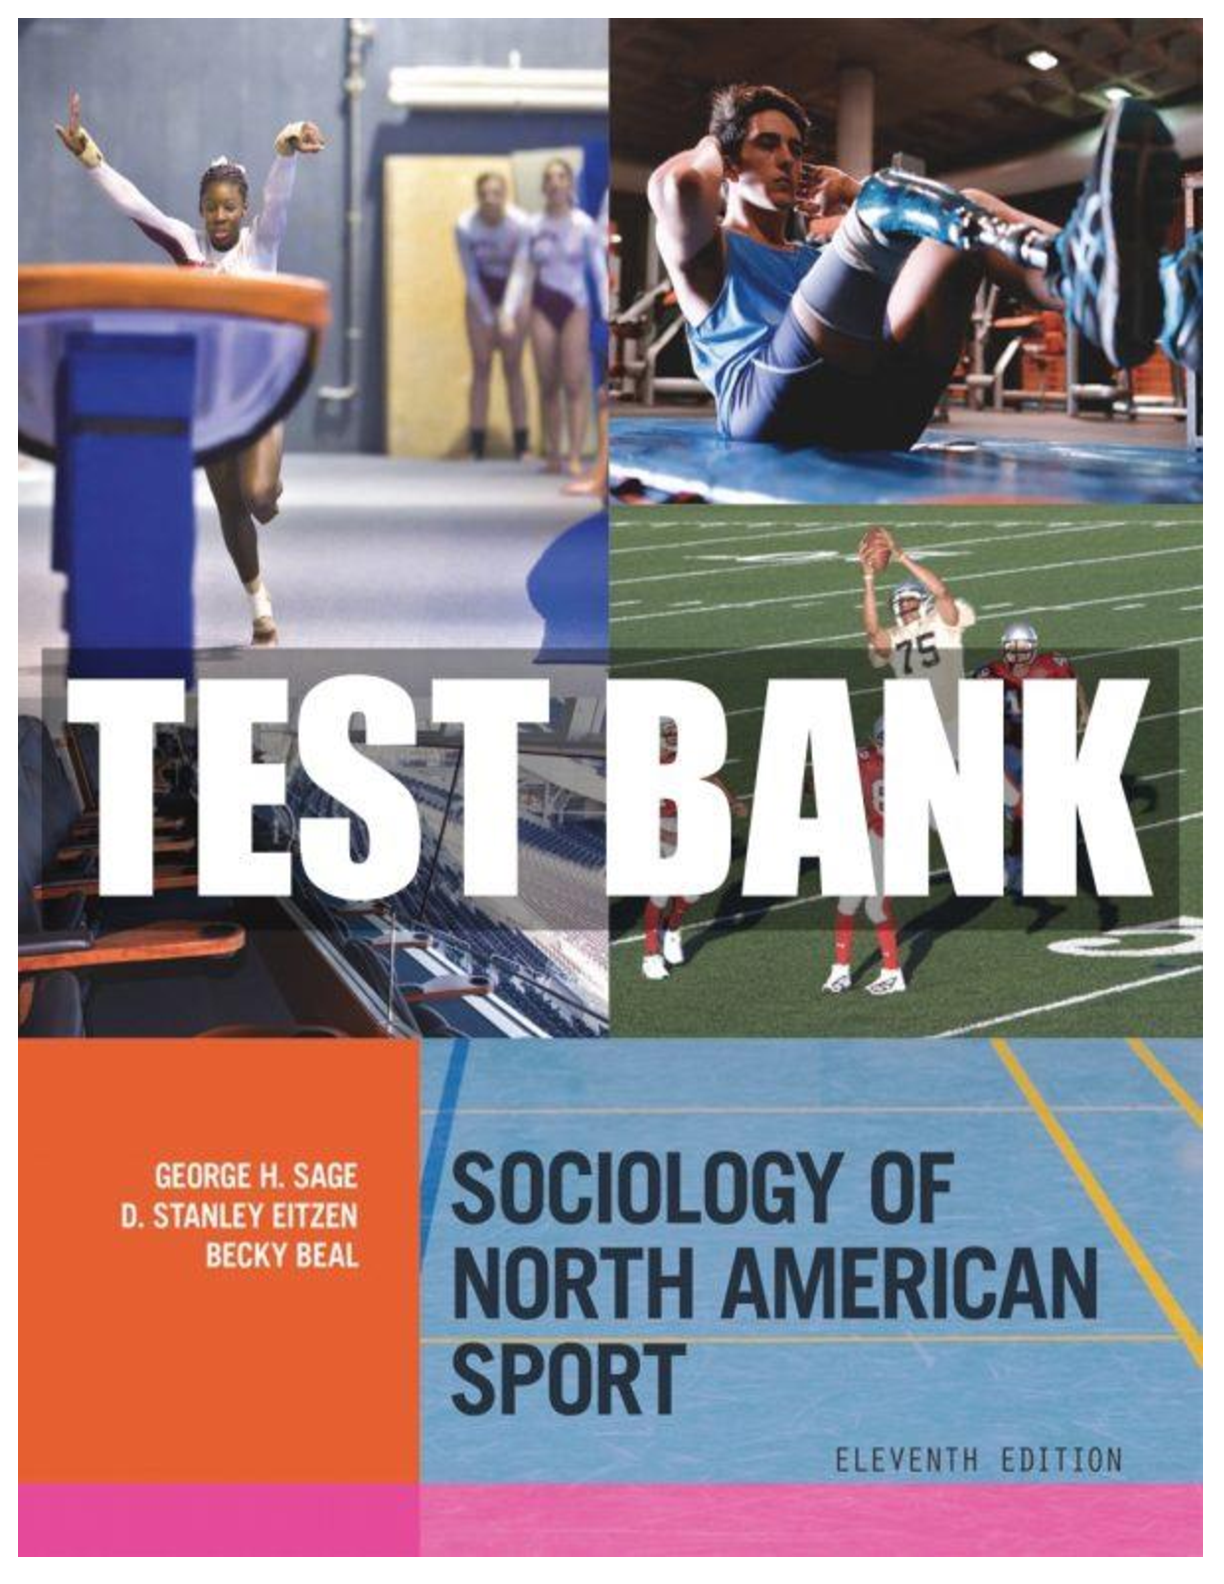 TEST BANK for Sociology of North American Sport 11th Edition Sage Test Bank.png